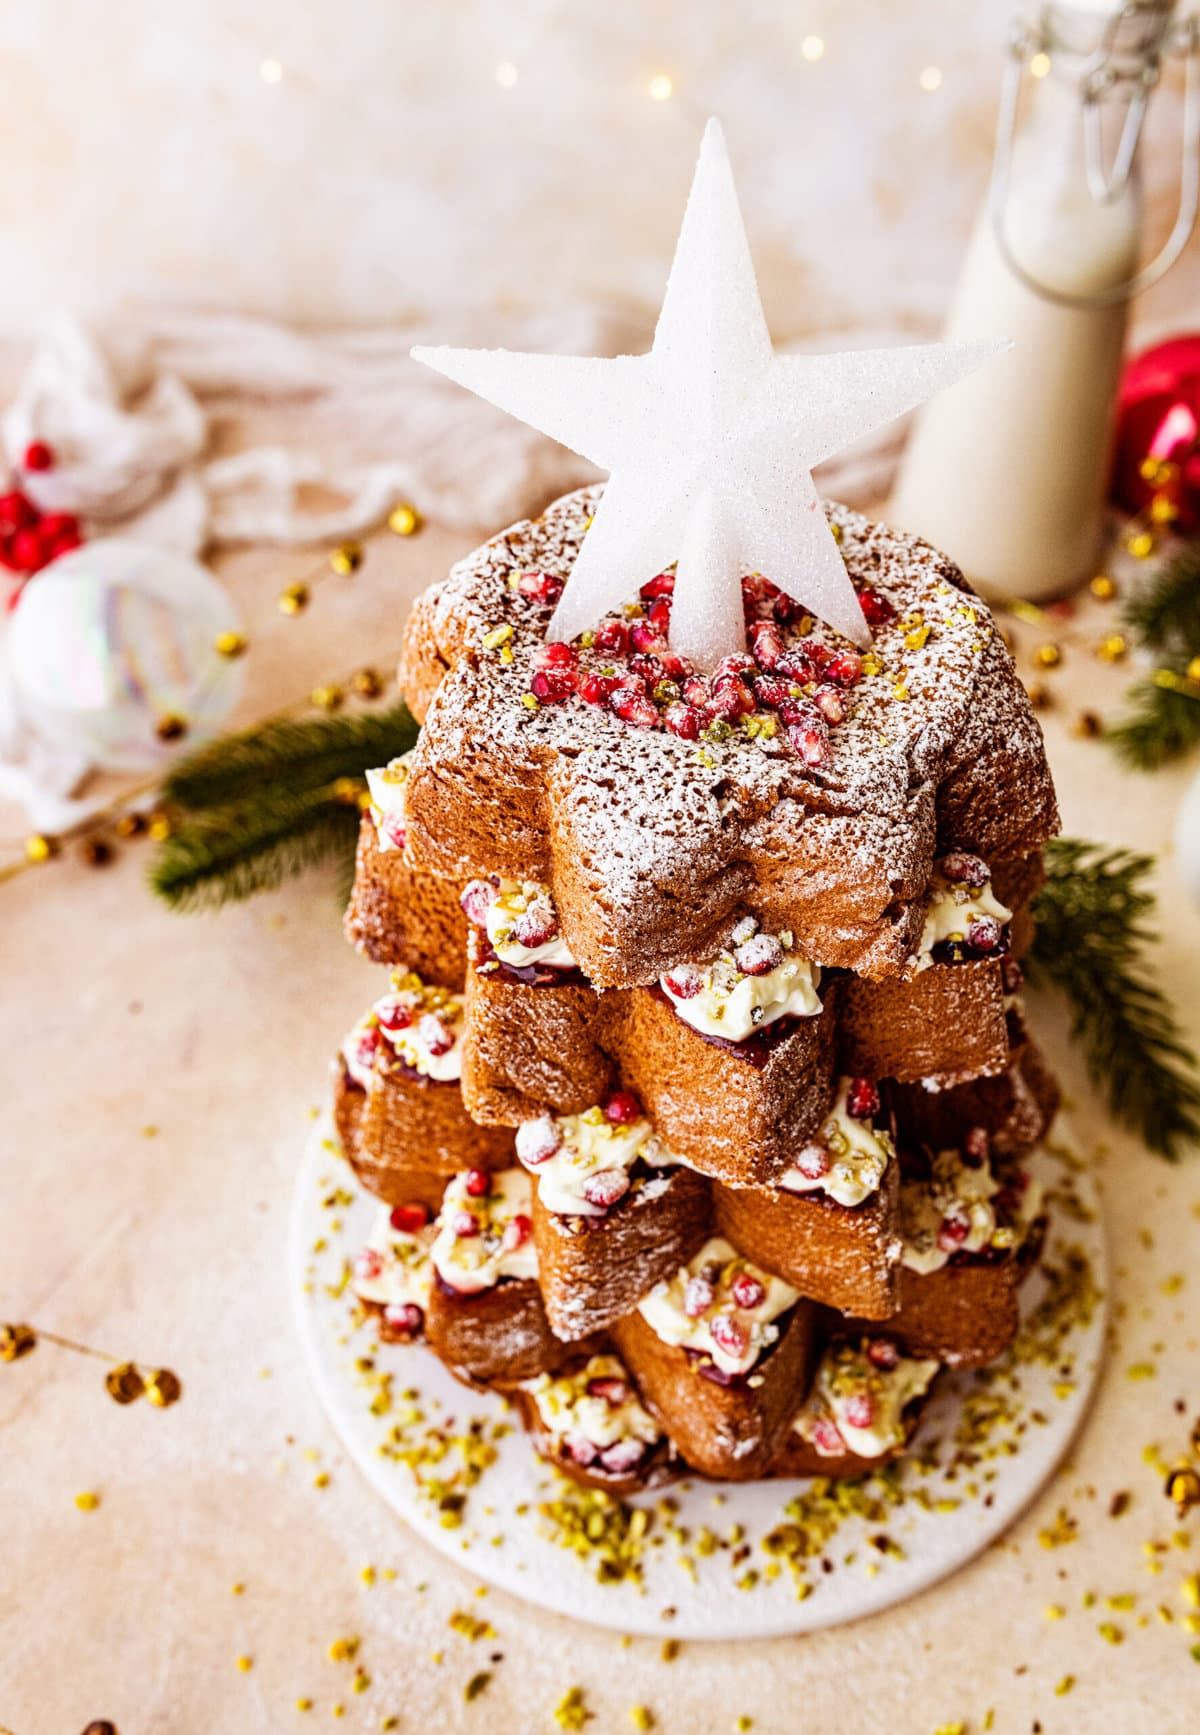 Pandoro Christmas Tree Cake (Italian Christmas Cake)- finished cake decorated with pomegranate seeds and a beautiful white star on top. Christmas. White snowkflake decorations in background.